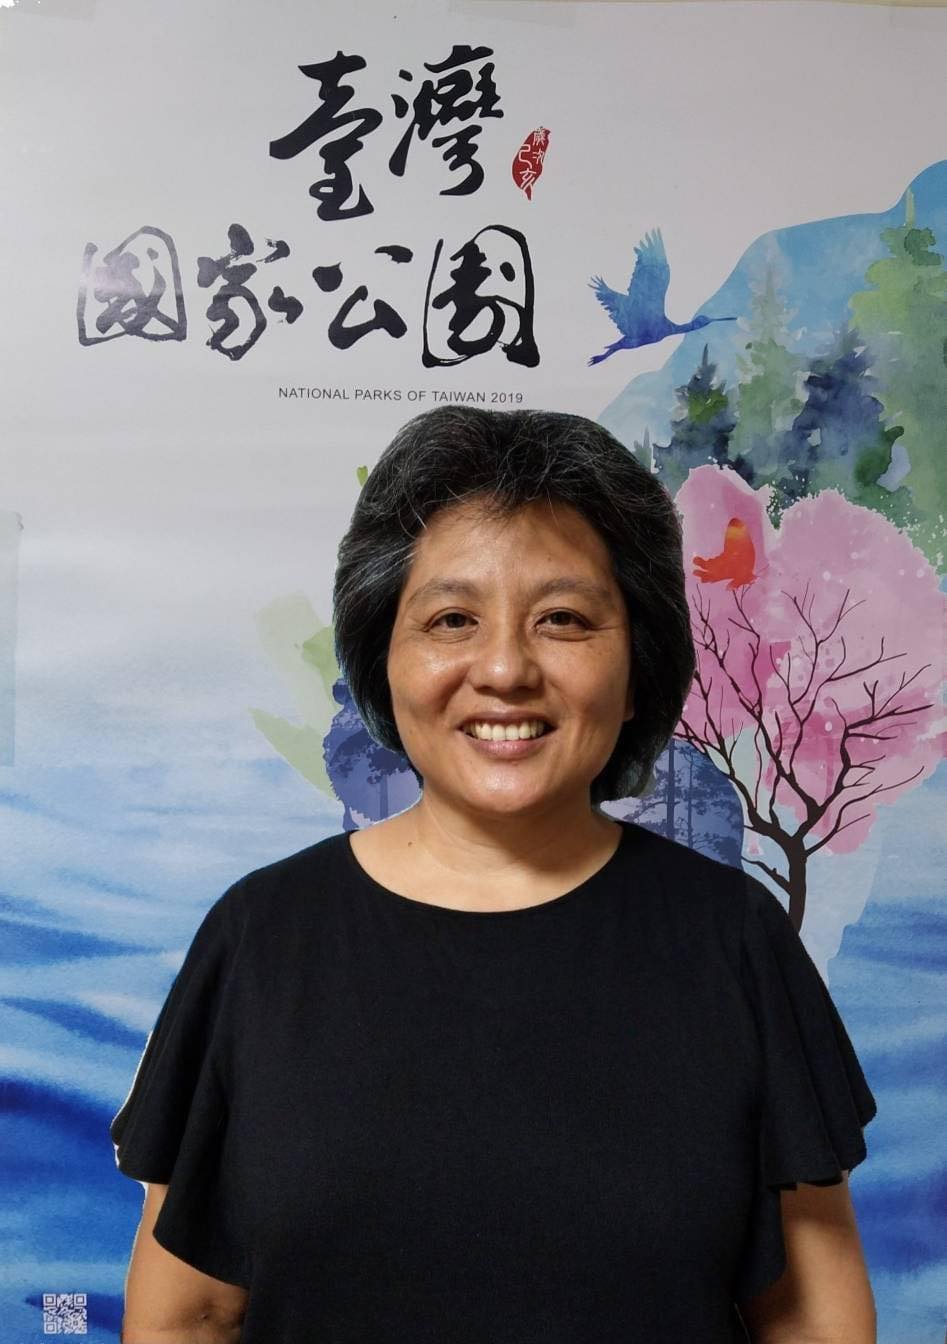 Chen was born in a Christian family and has paid special attention to people of different cultures and foreigners since she was a child. Image courtesy of 4 Way News.